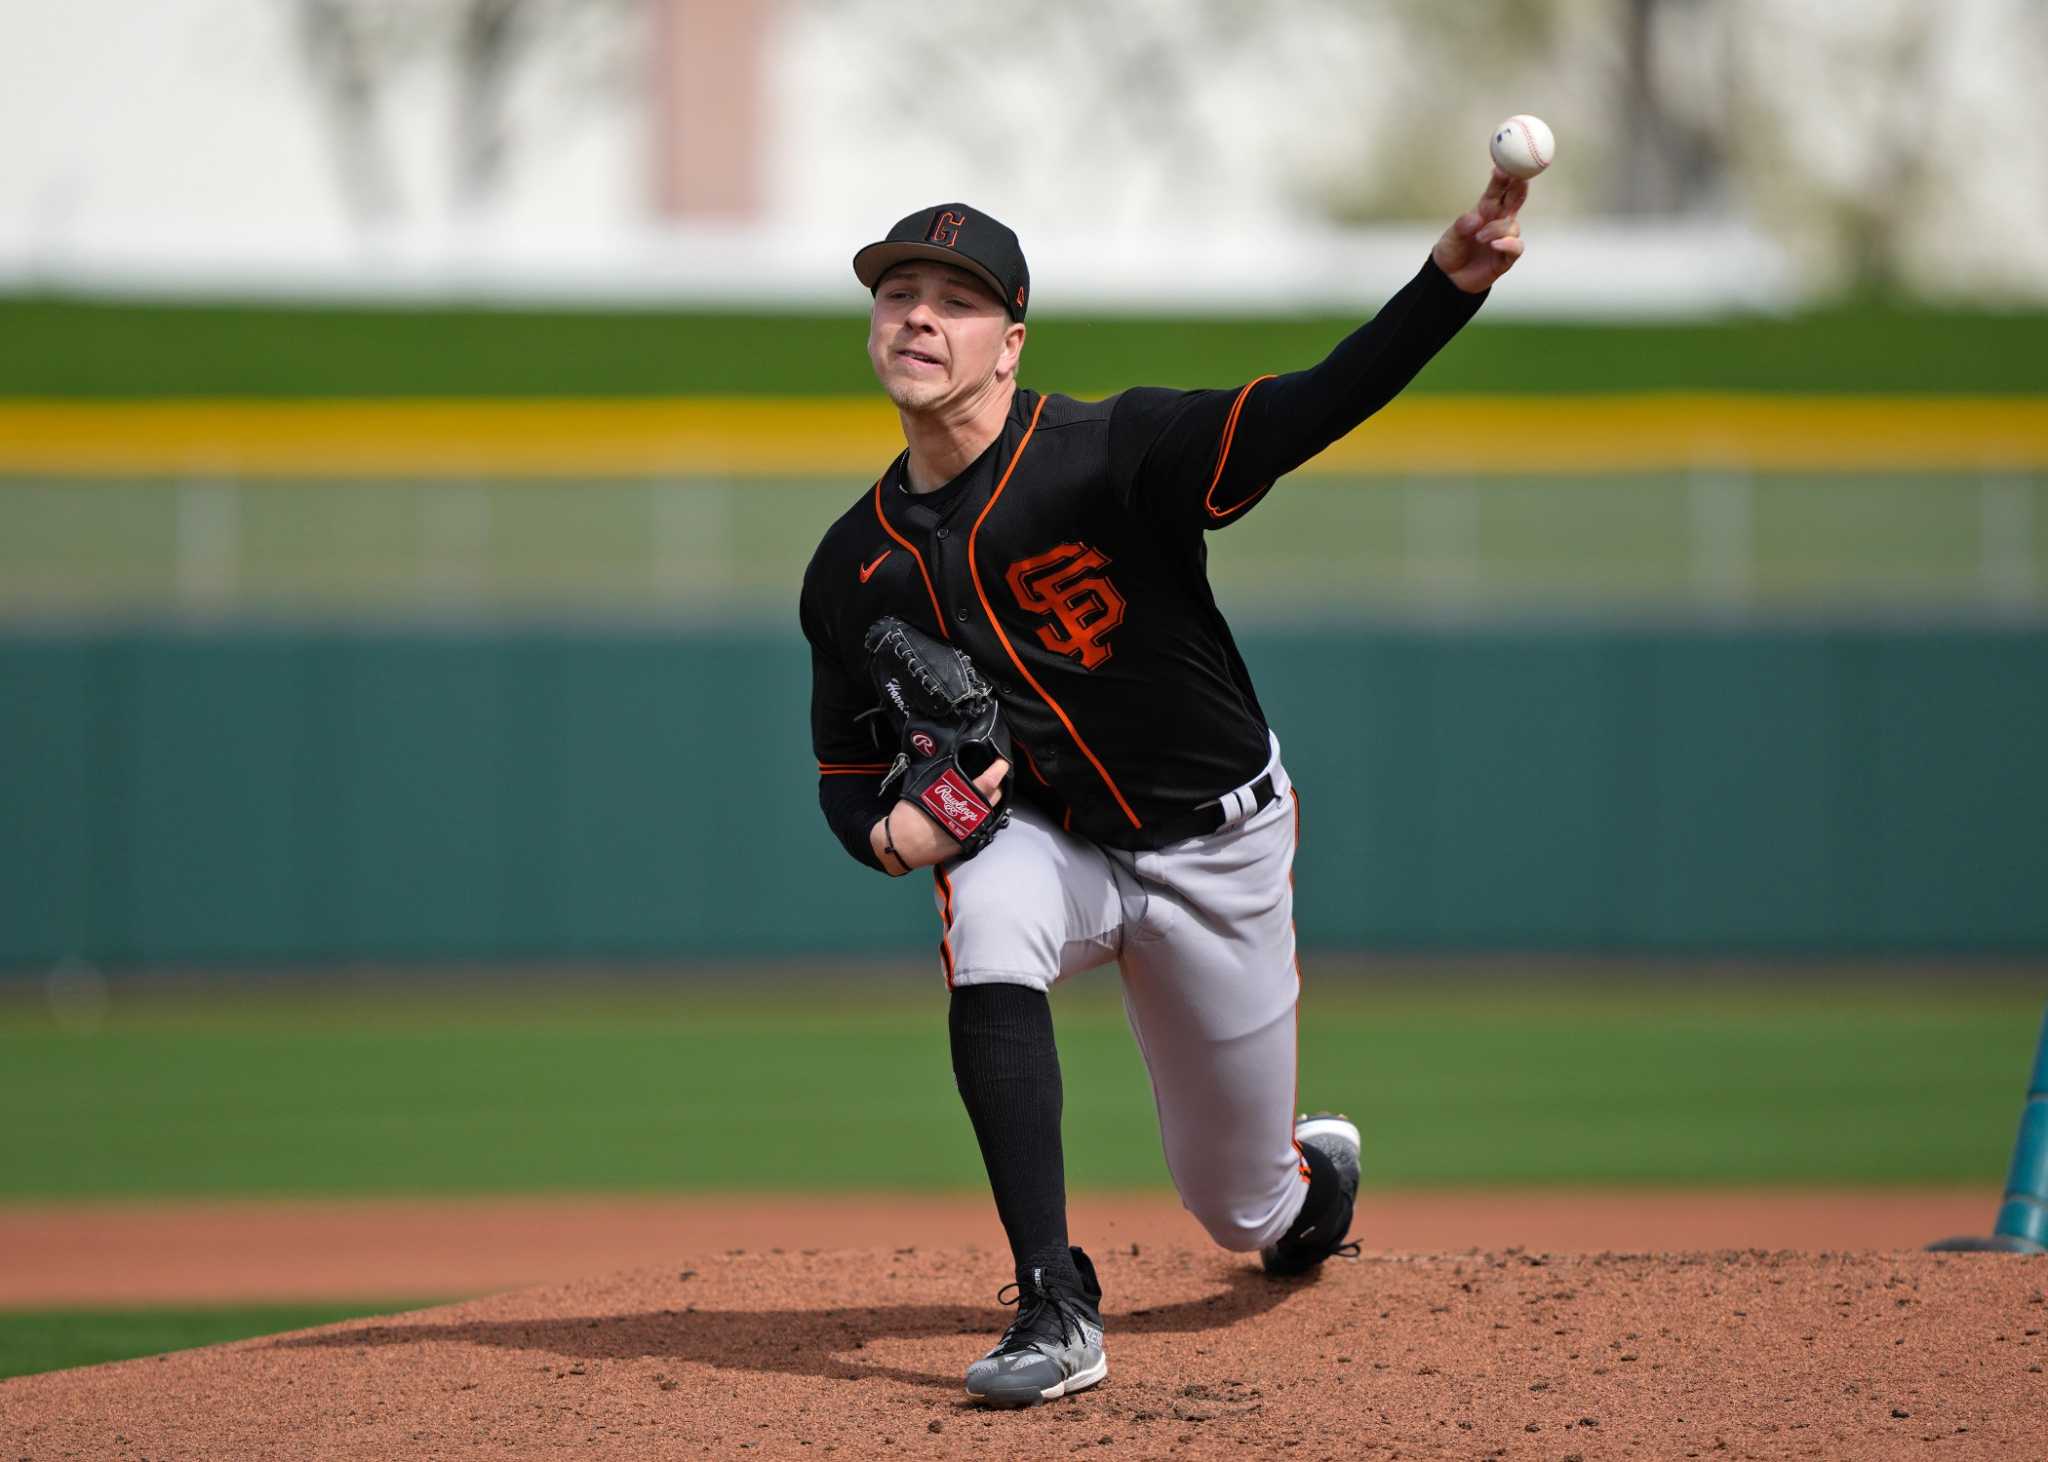 Giants sign reliever Luke Jackson, trade for former Stanford pitcher